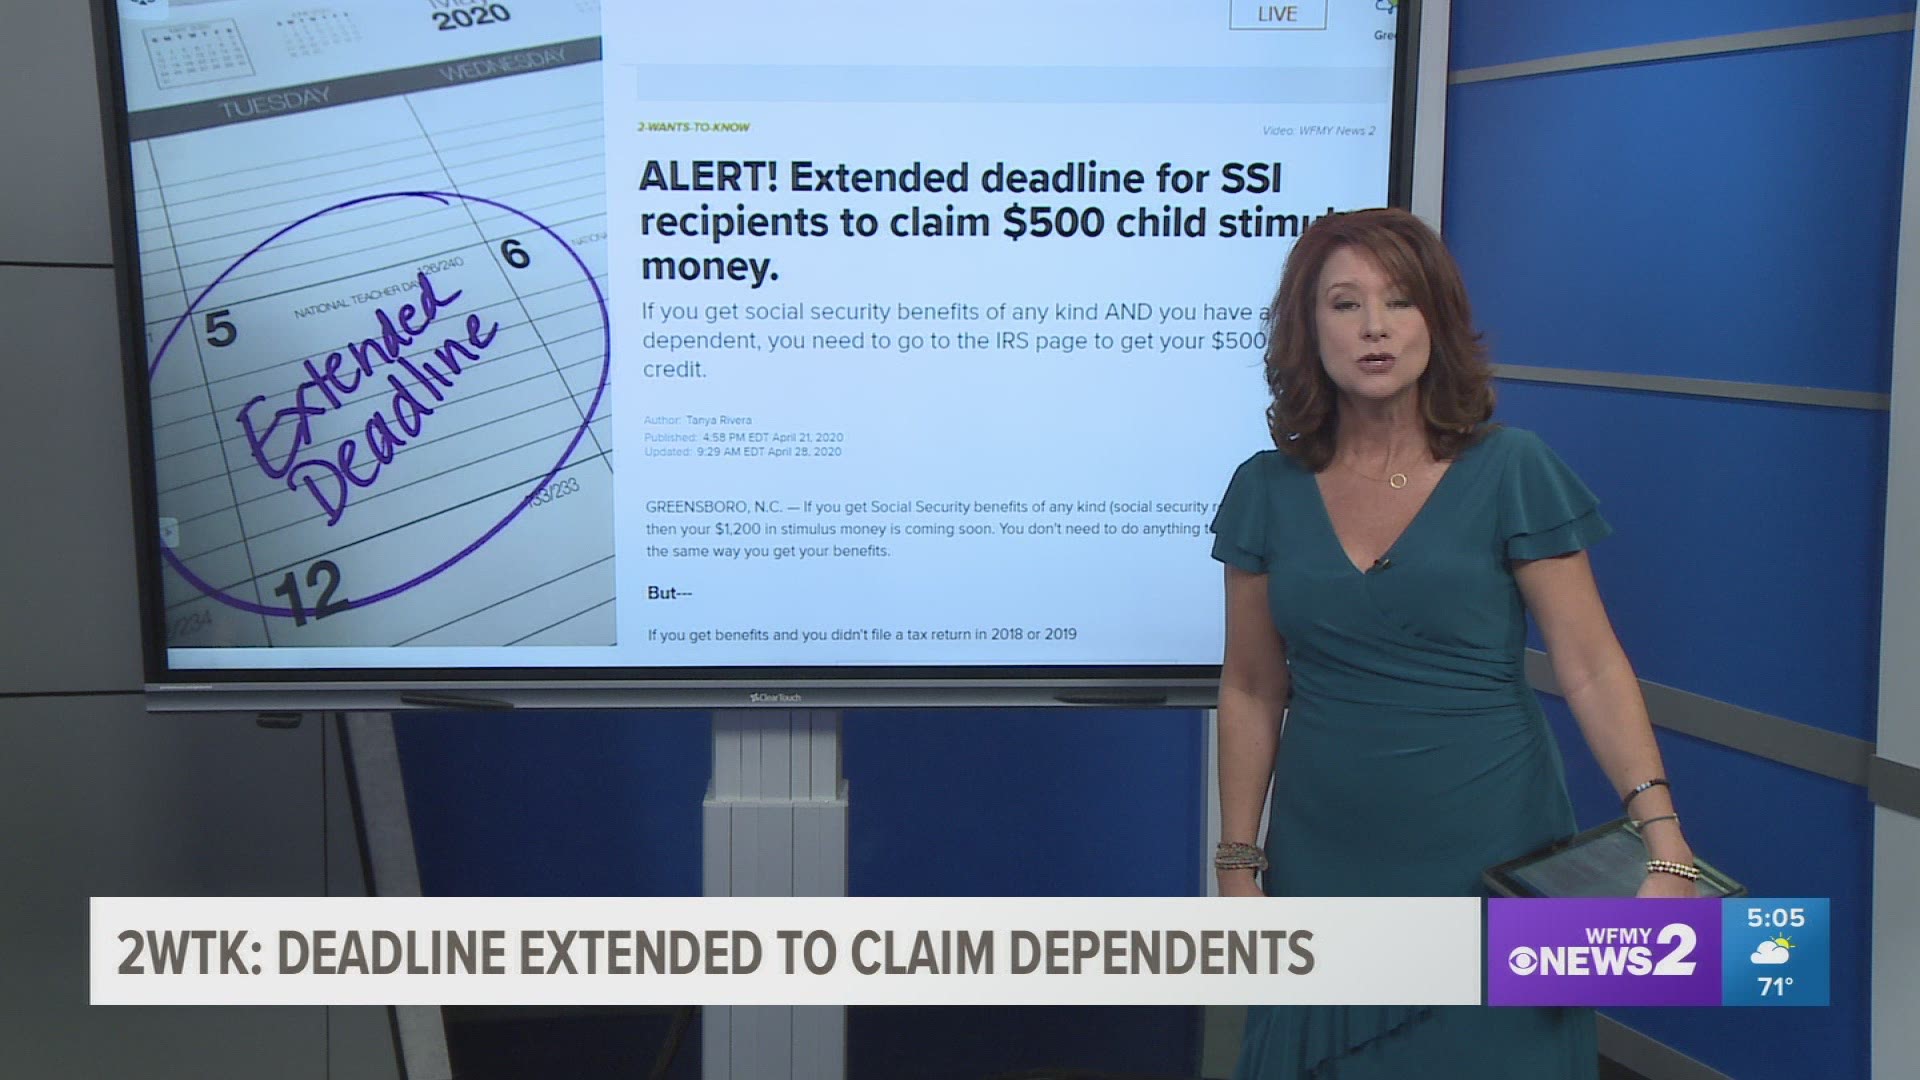 The IRS has extended the deadline for folks on SSI to claim their independents and get $500 per child.